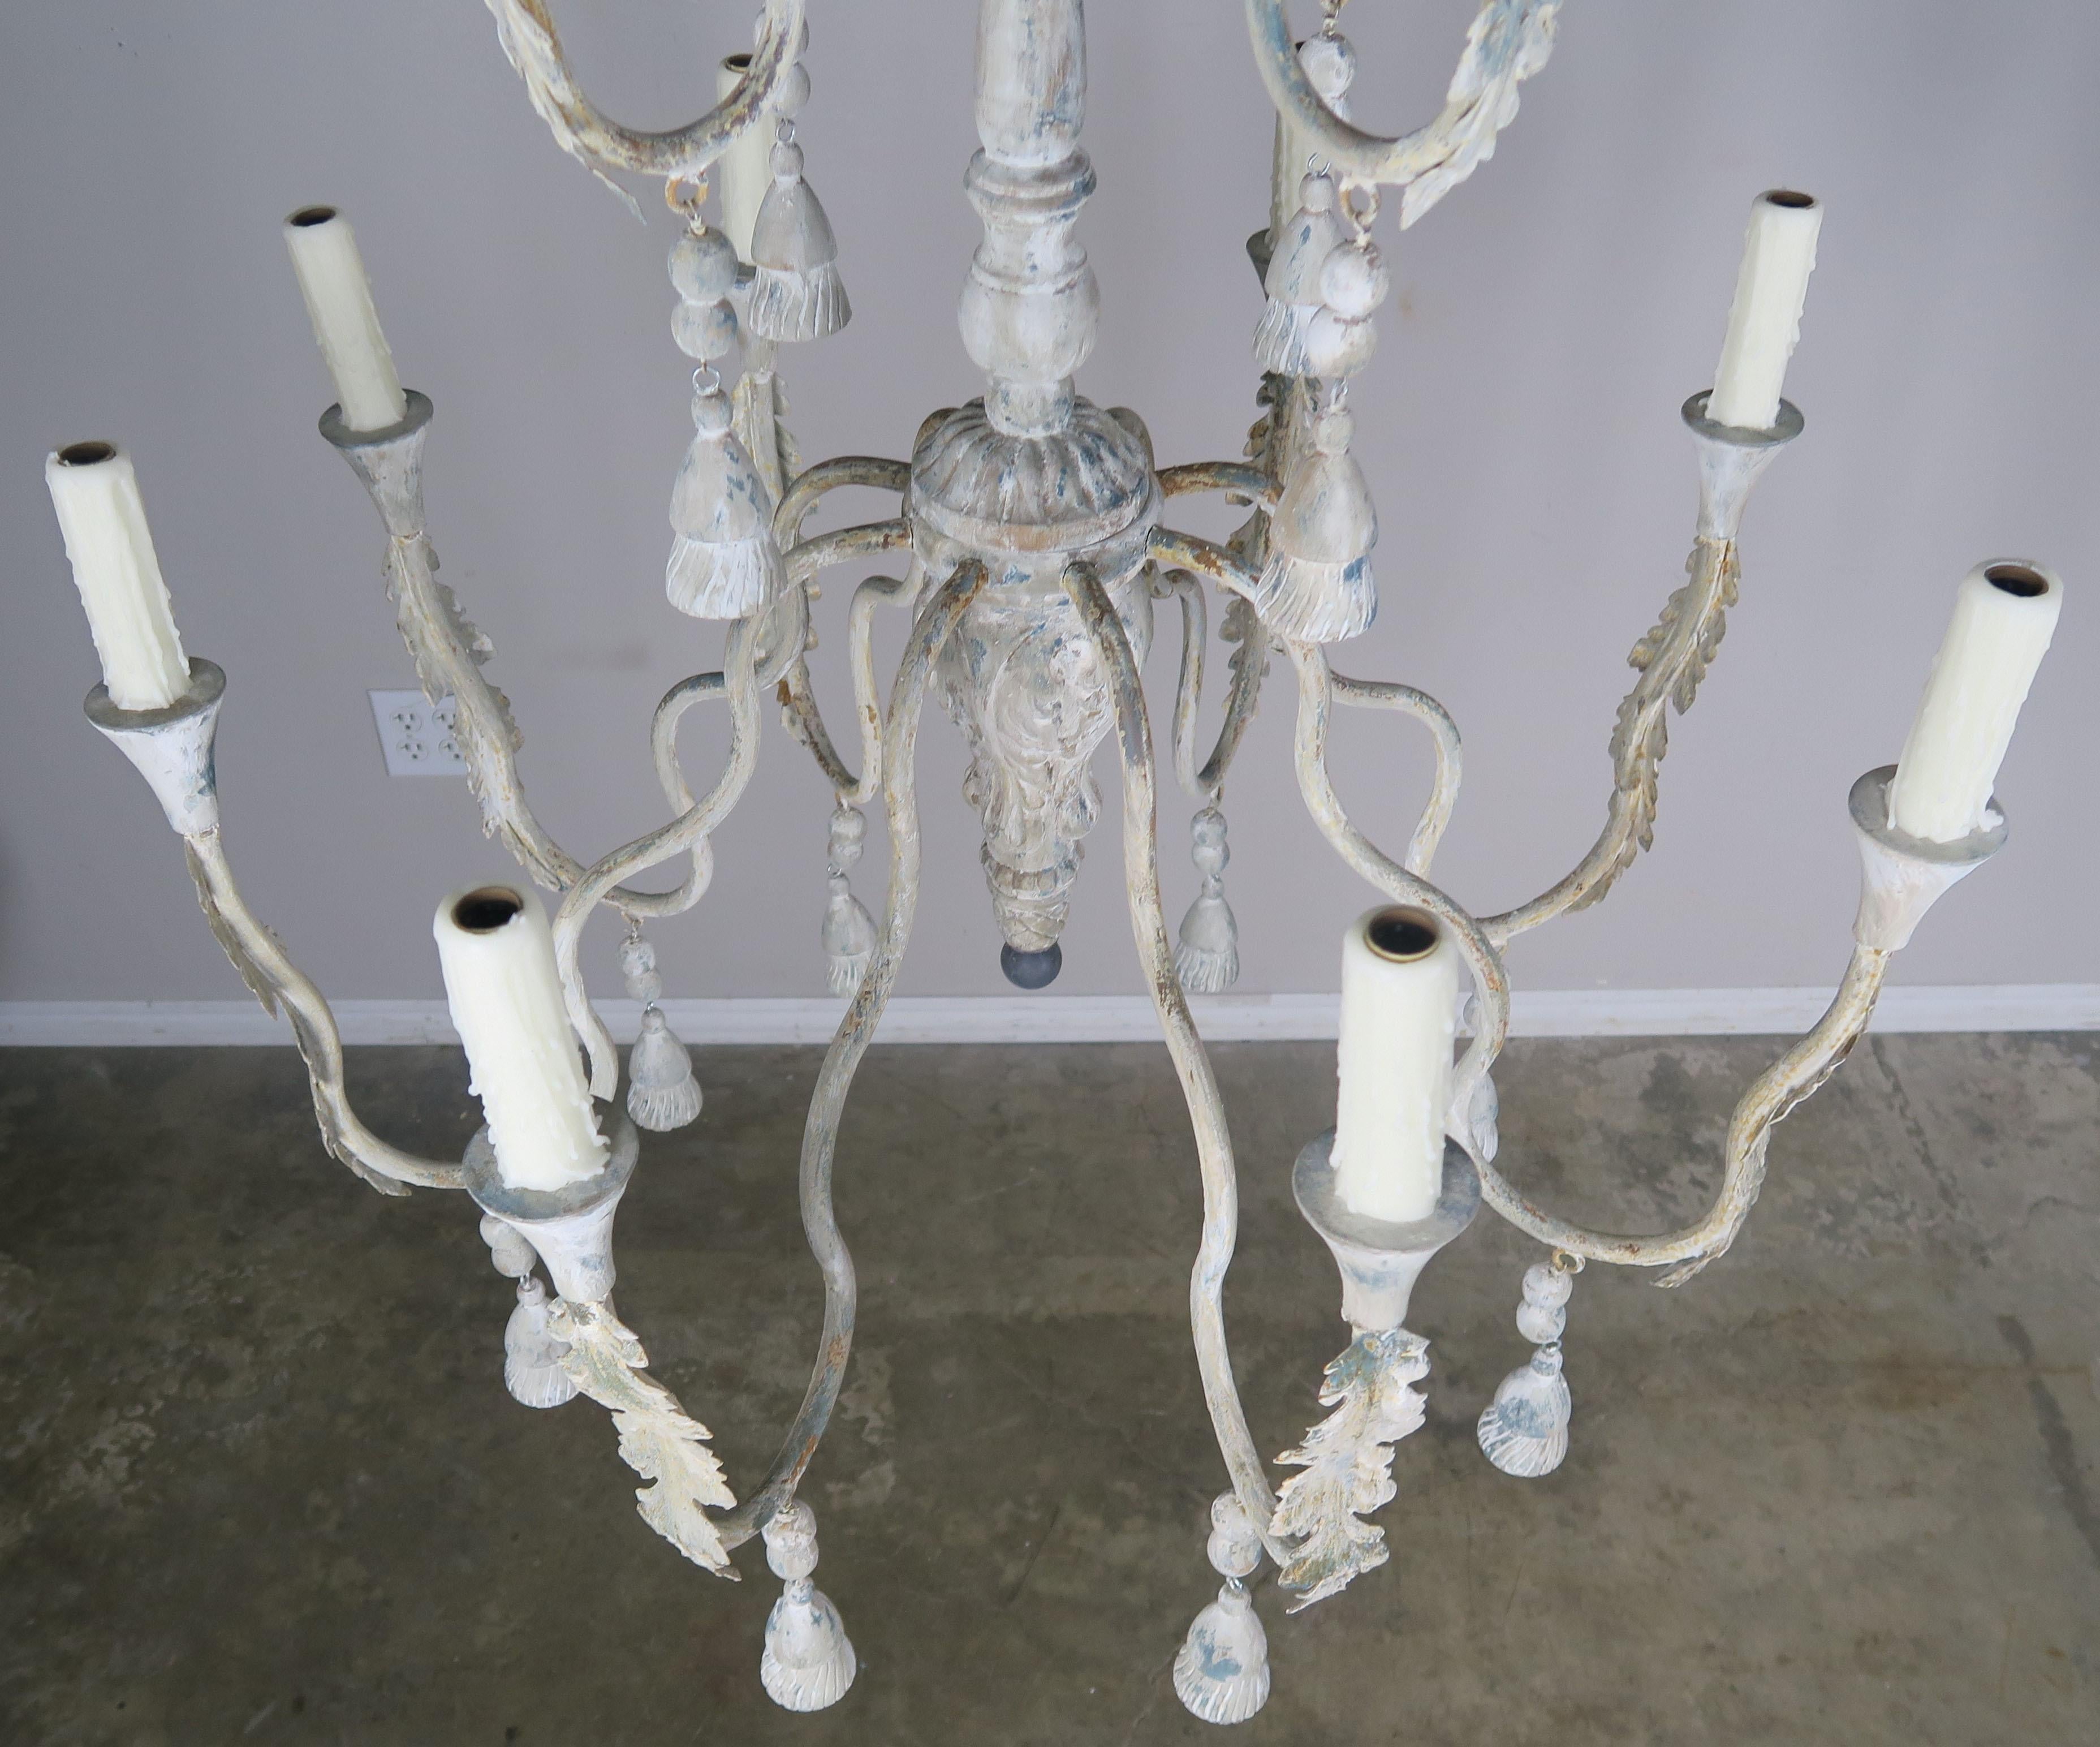 2-Tier Painted Cream Colored Chandeliers with Tassels by Melissa Levinson 1